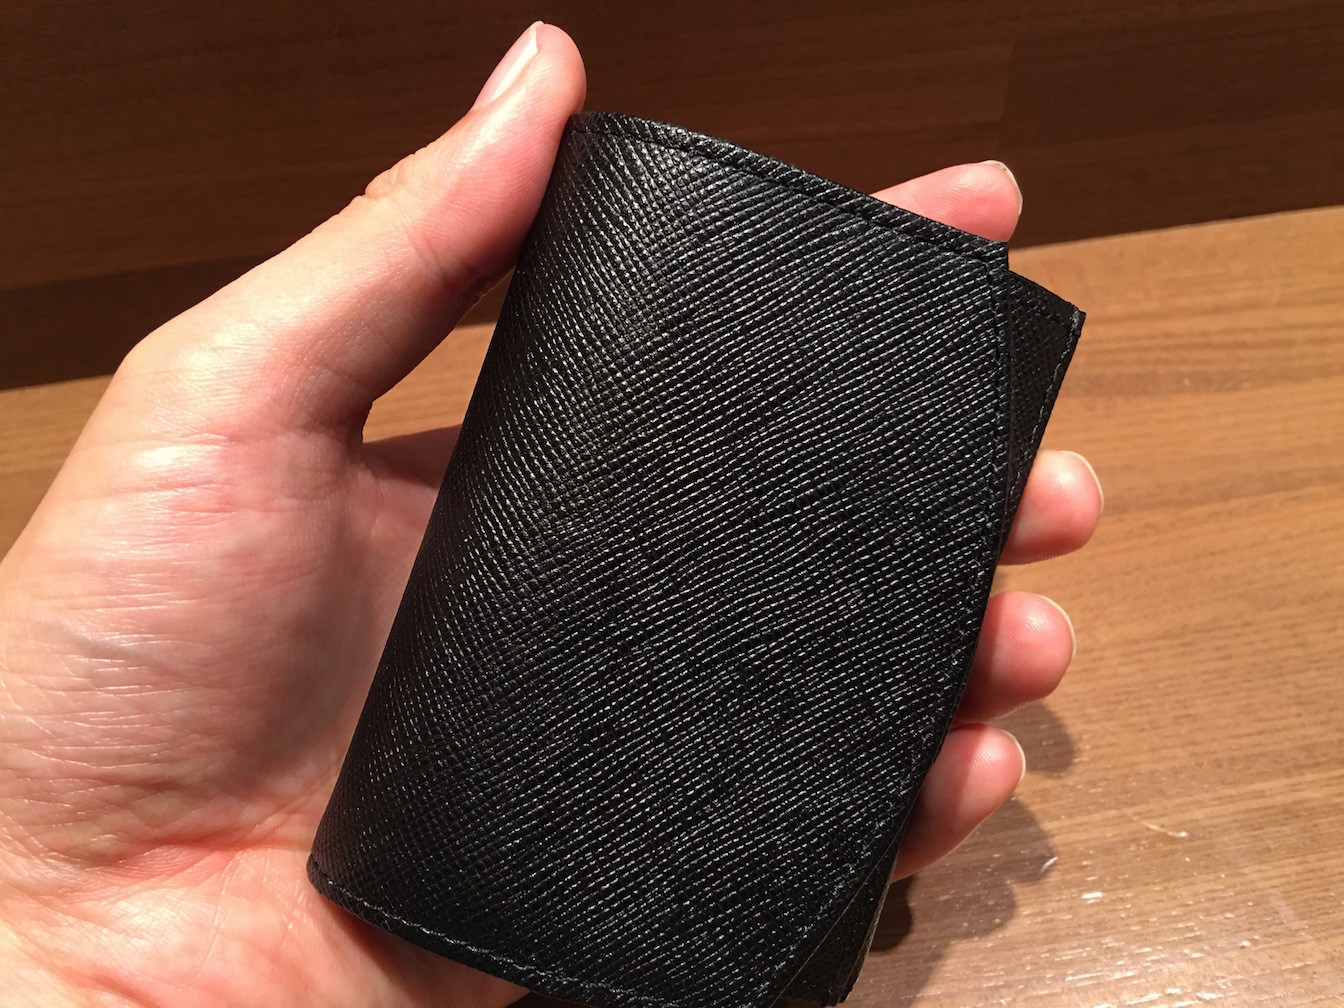 Hammock wallet compact first impression 15